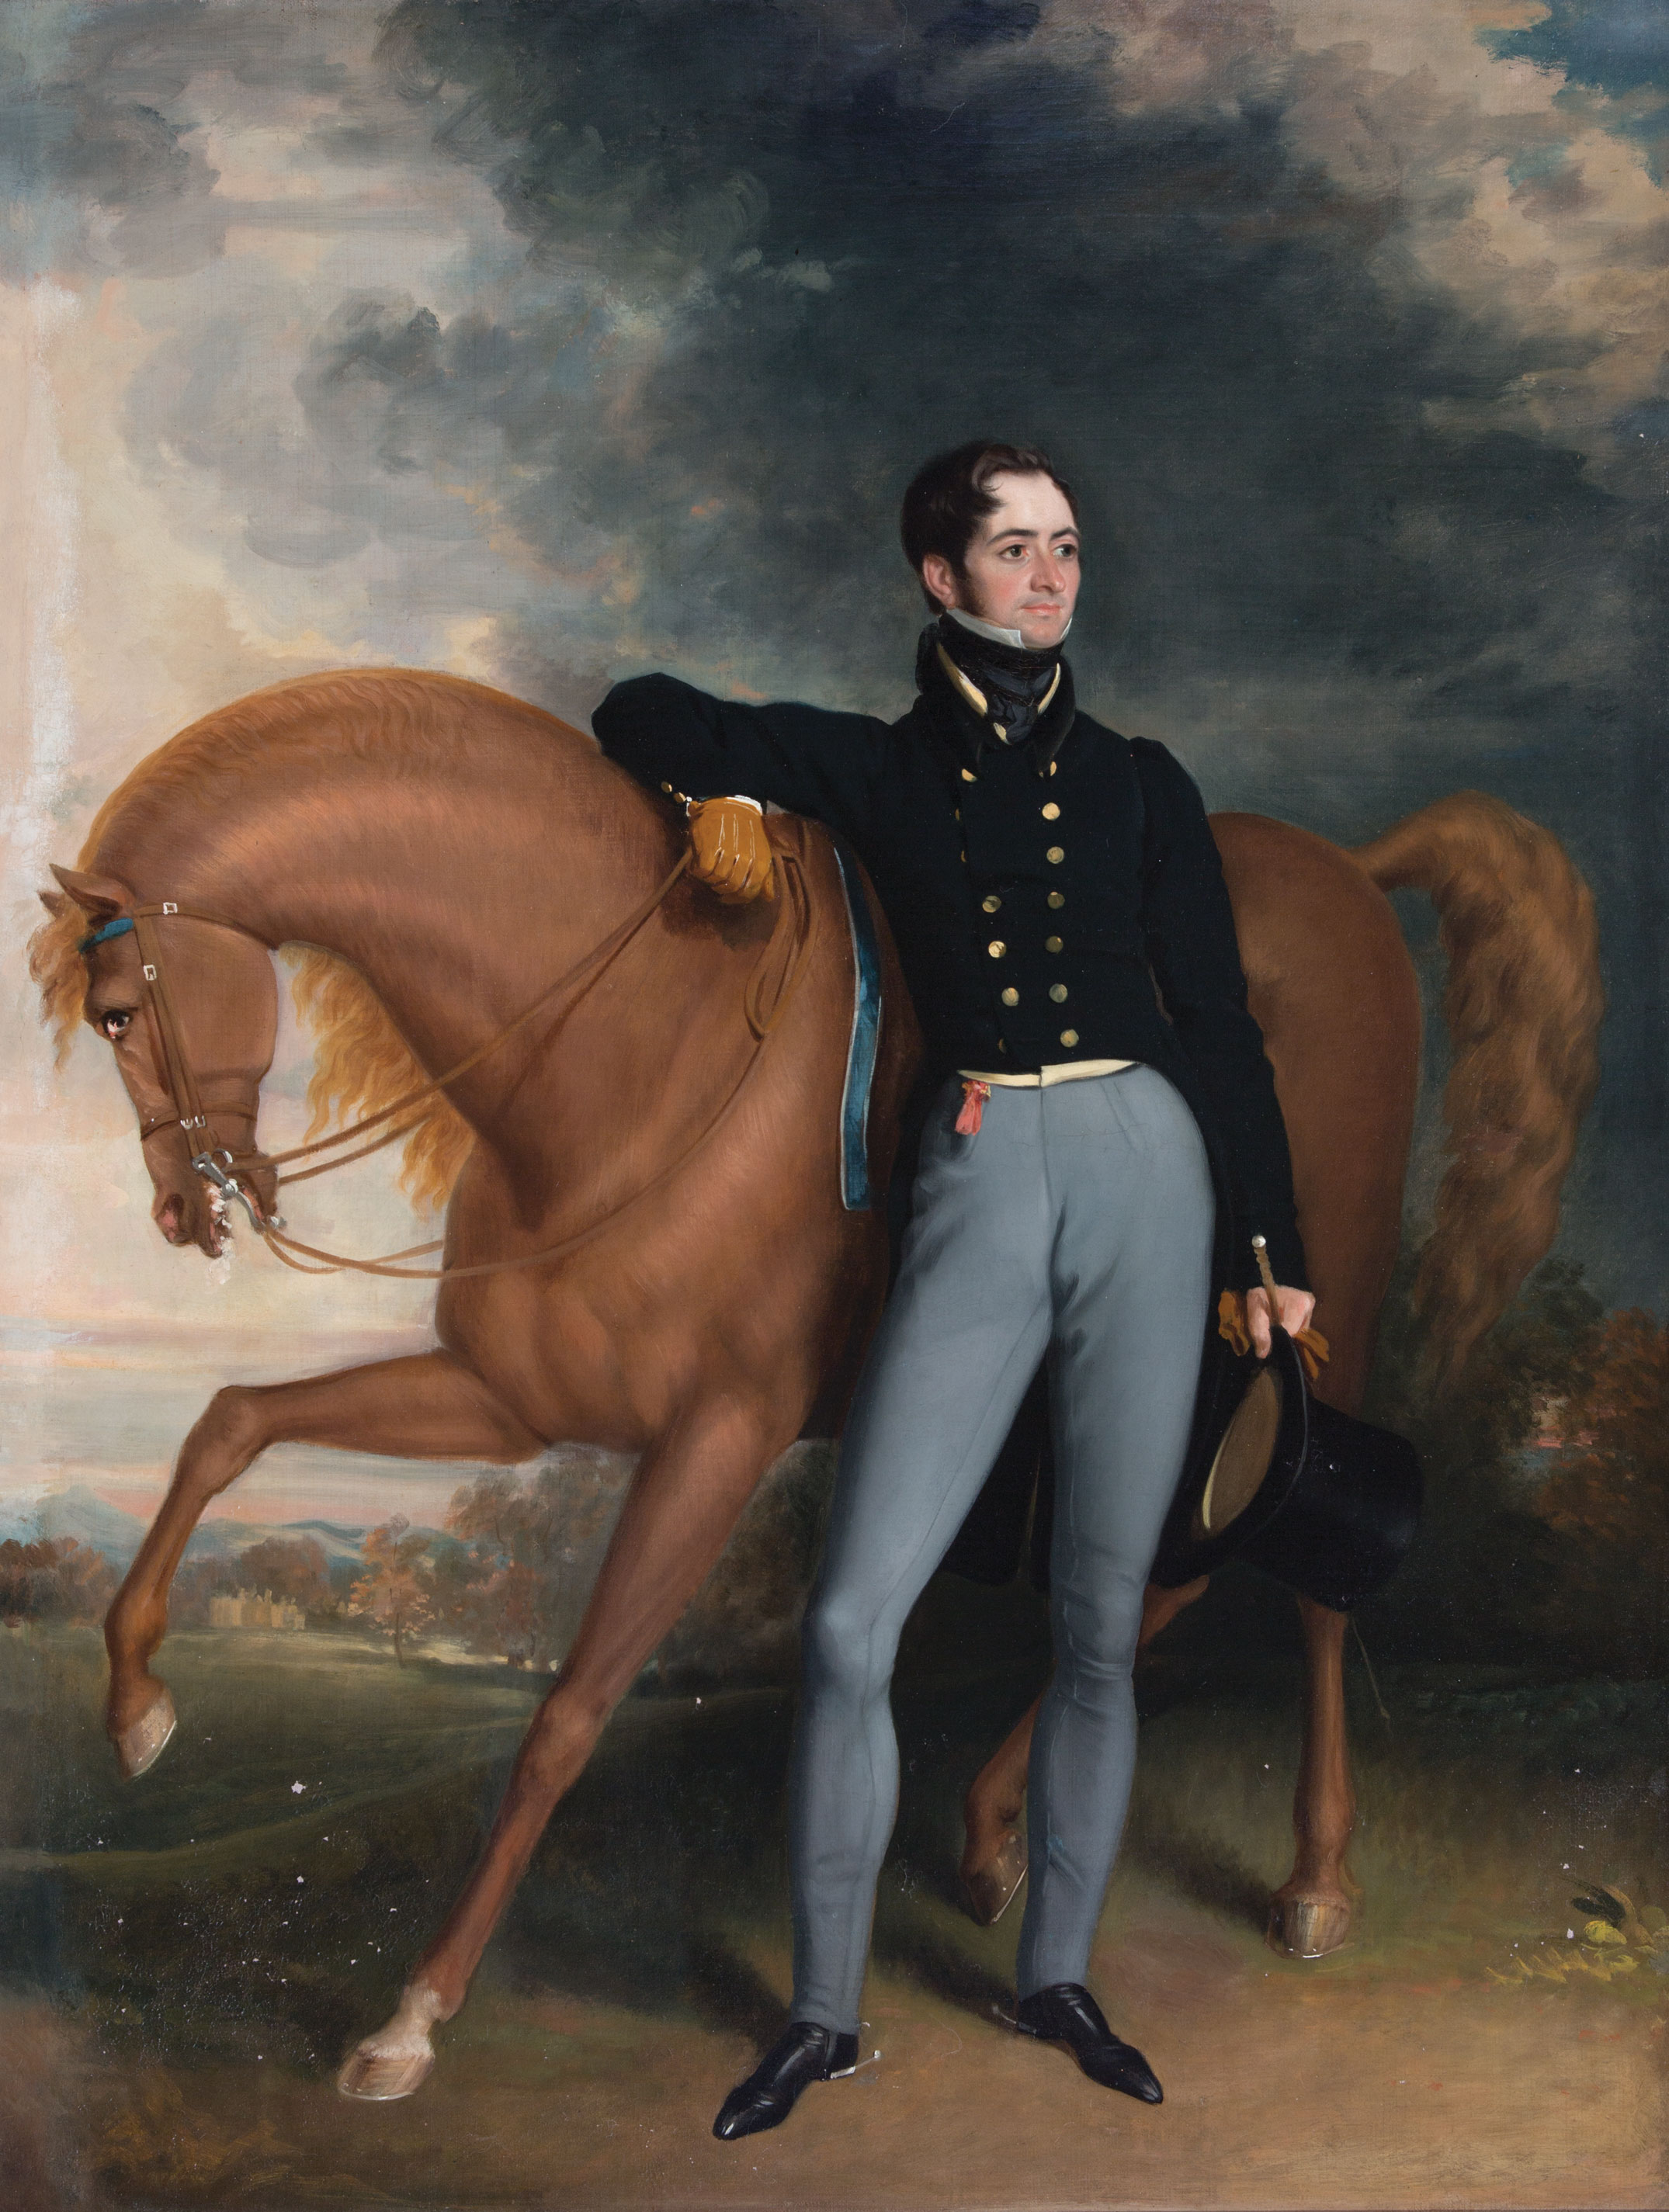 British School, 19th c ., "Portrait of a Gentleman with Horse", oil on canvas, unsigned, 35 in. x